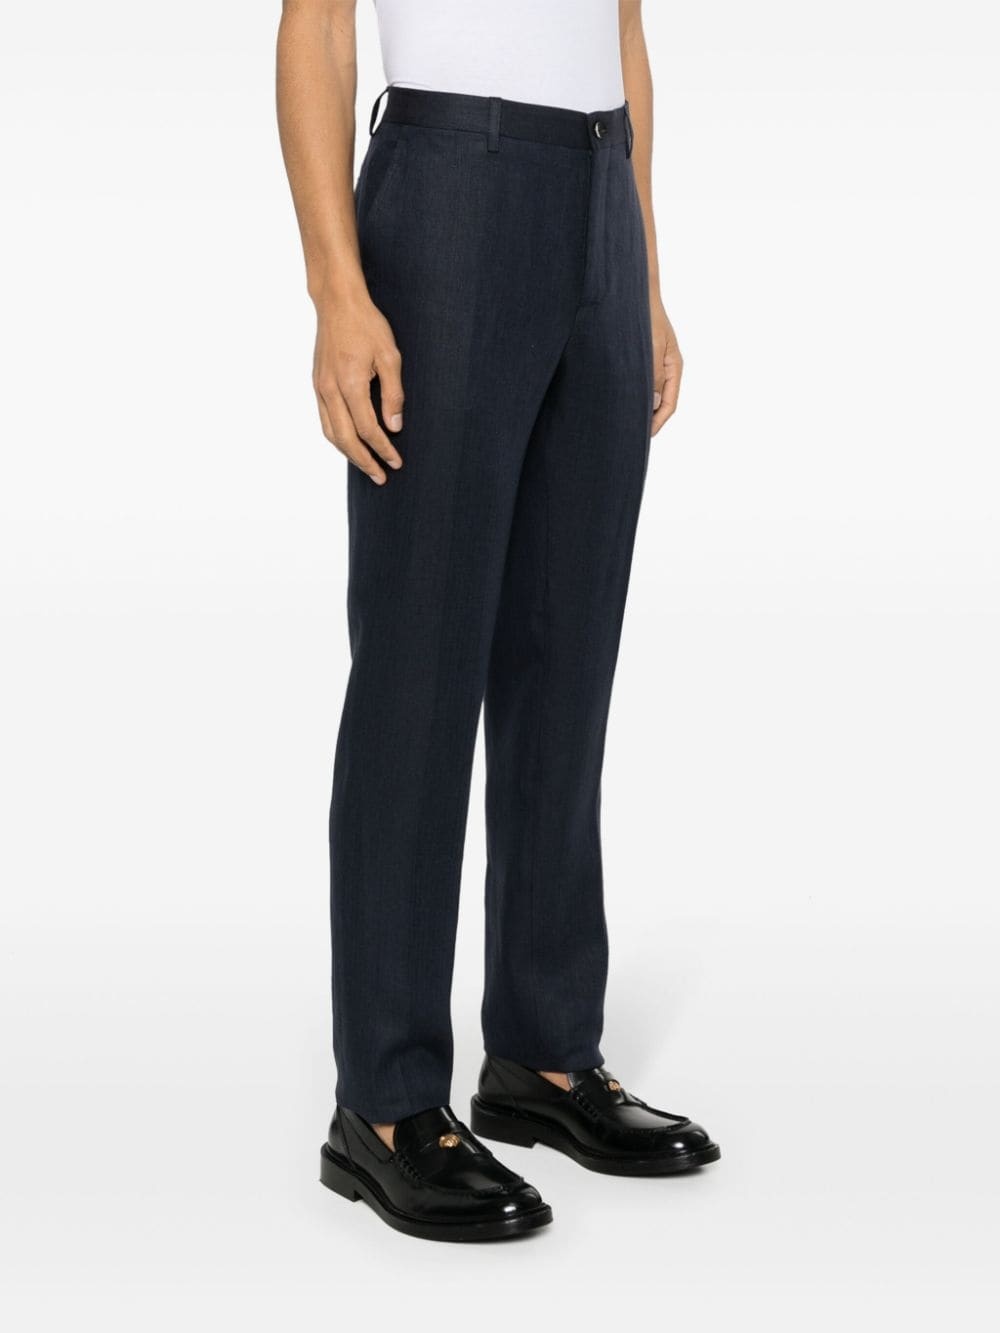 pressed-crease linen trousers - 3